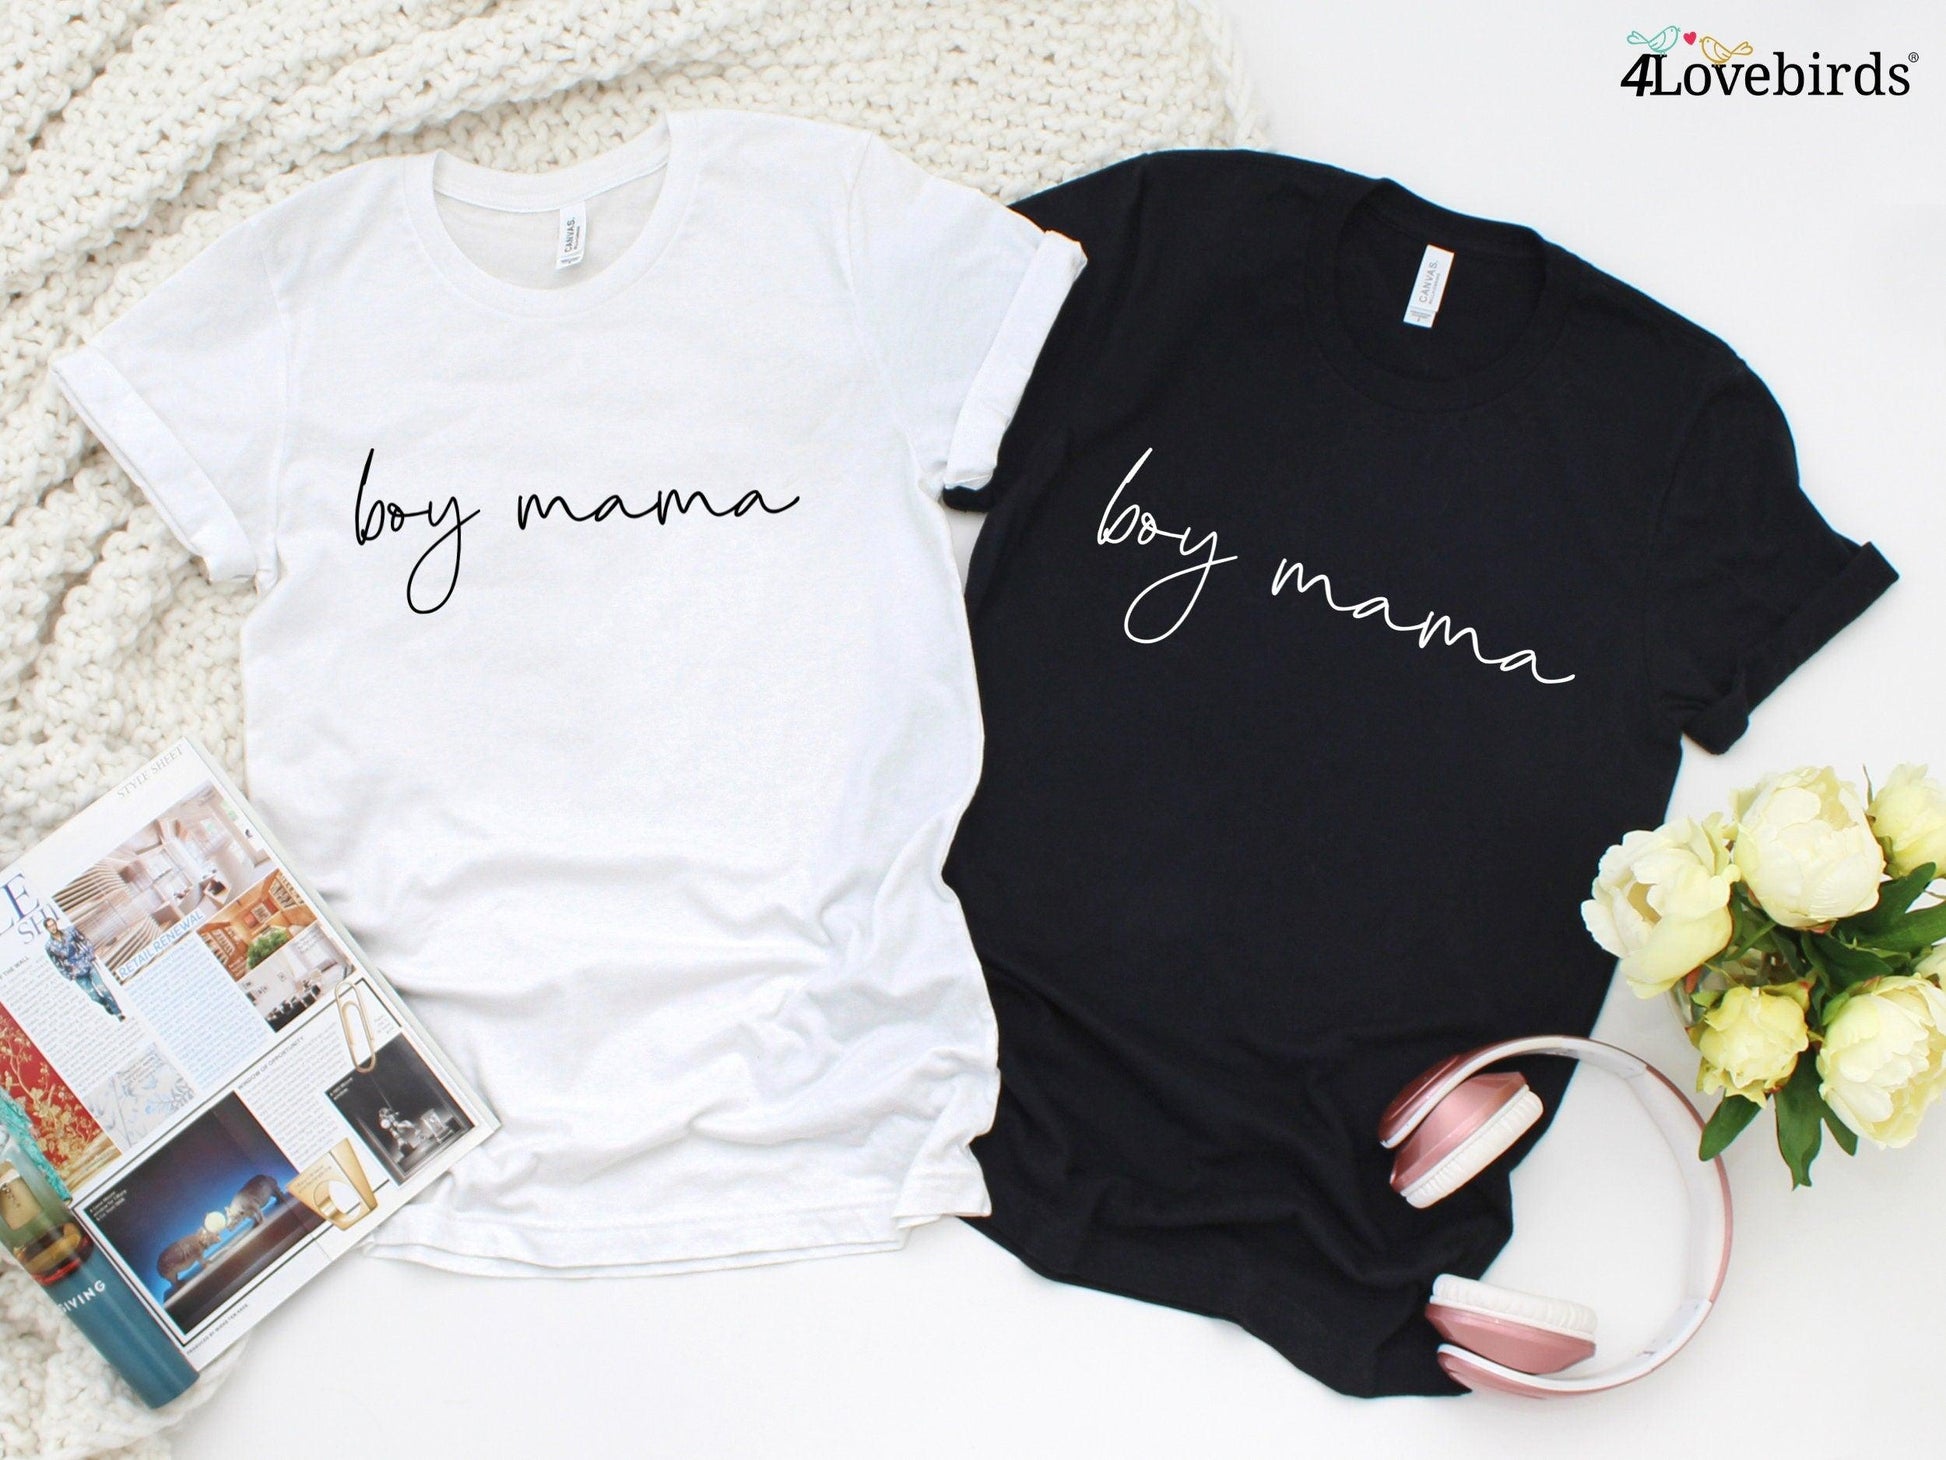 Funny Mom Of 3 Boys Mothers Day Gifts Shirt & Hoodie 